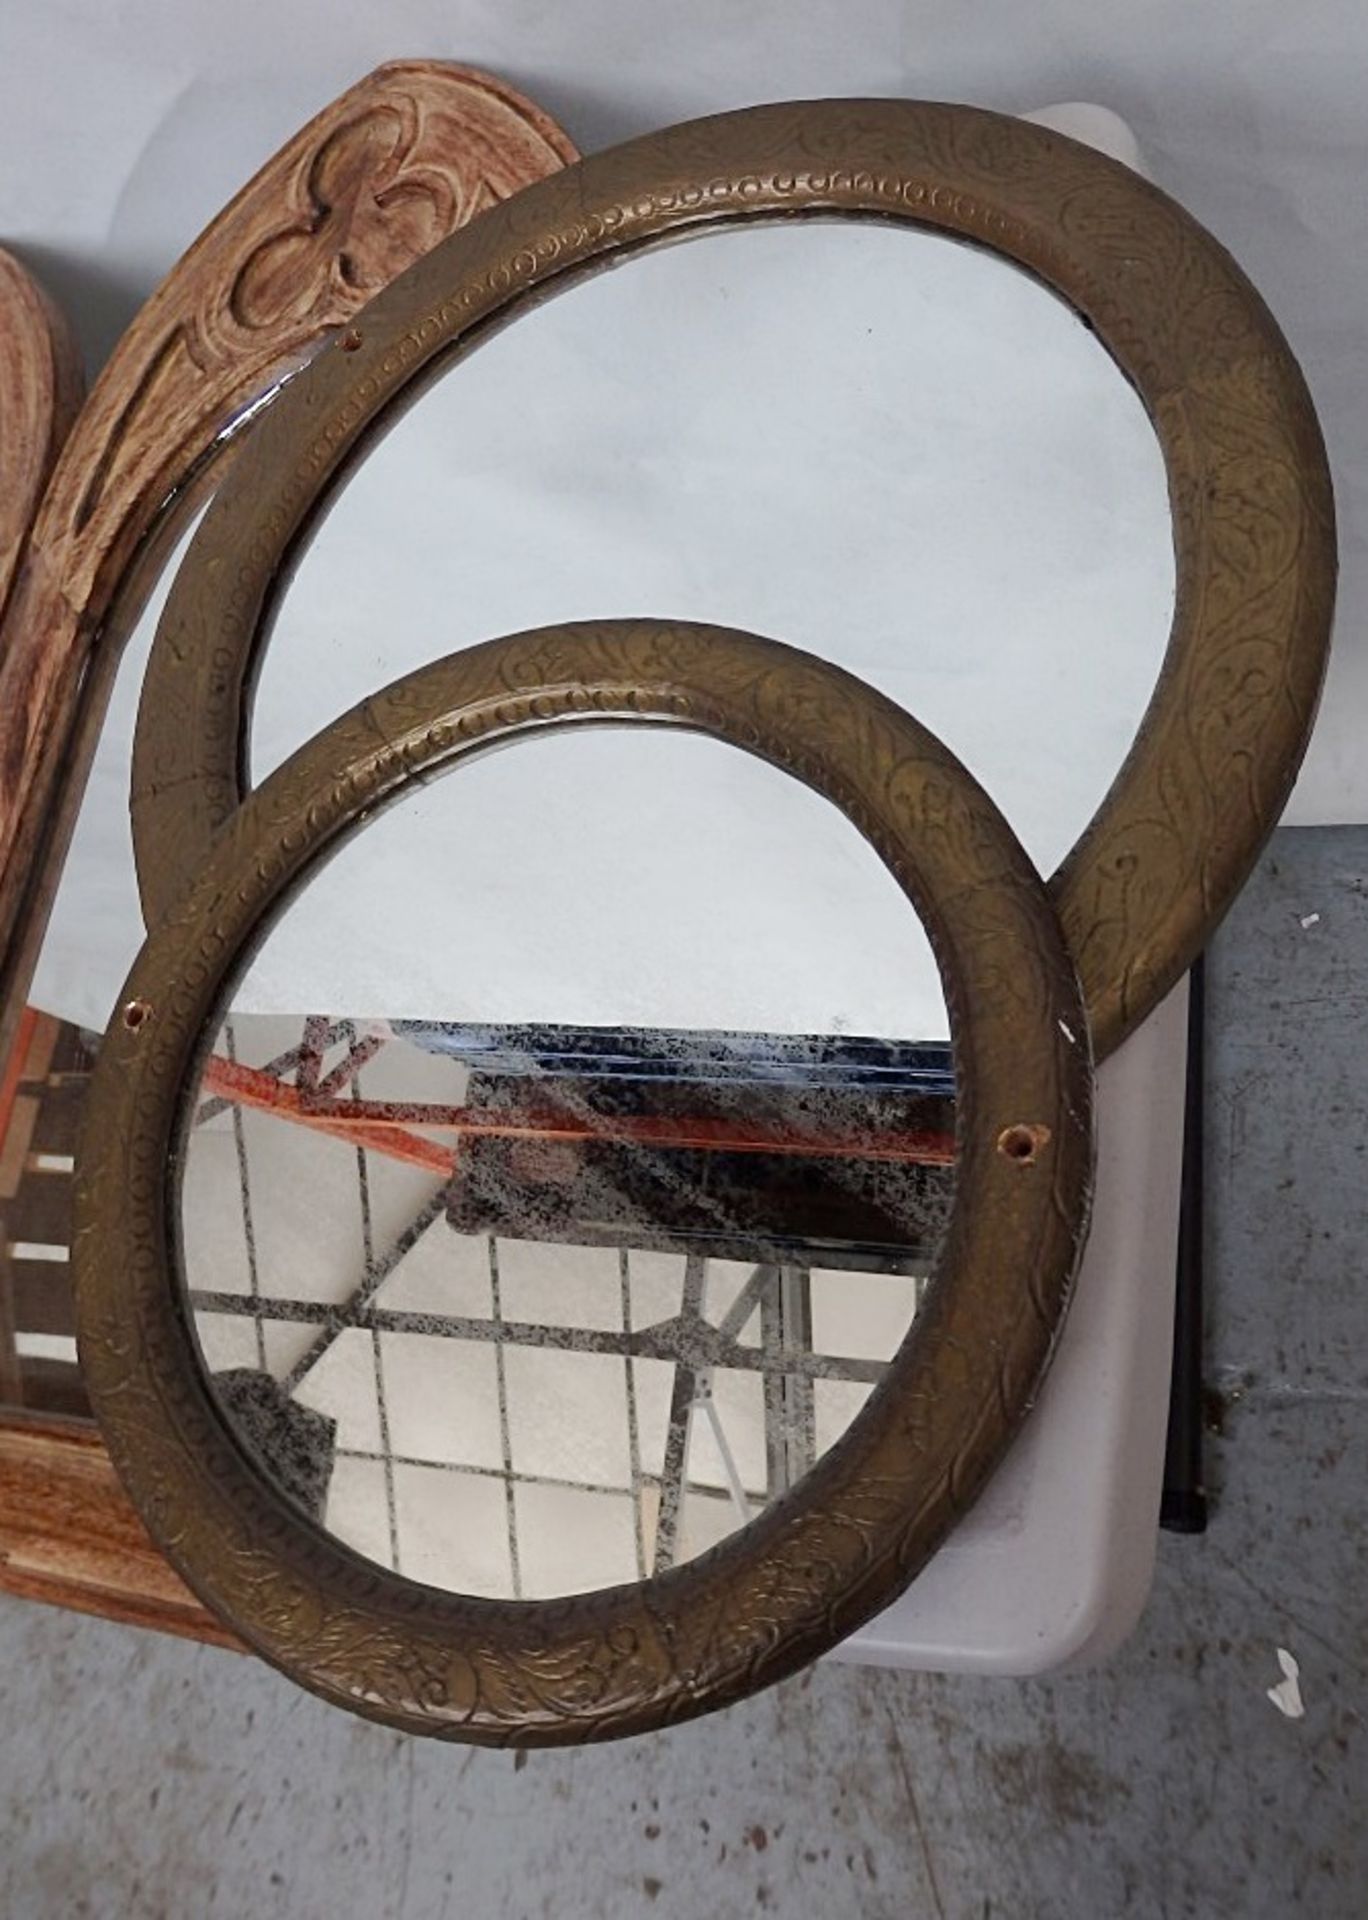 4 x Assorted Gothic Style Framed Mirrors - Features 2 x Arched & 2 Round Designs - Ref: HOT040 - - Image 2 of 4